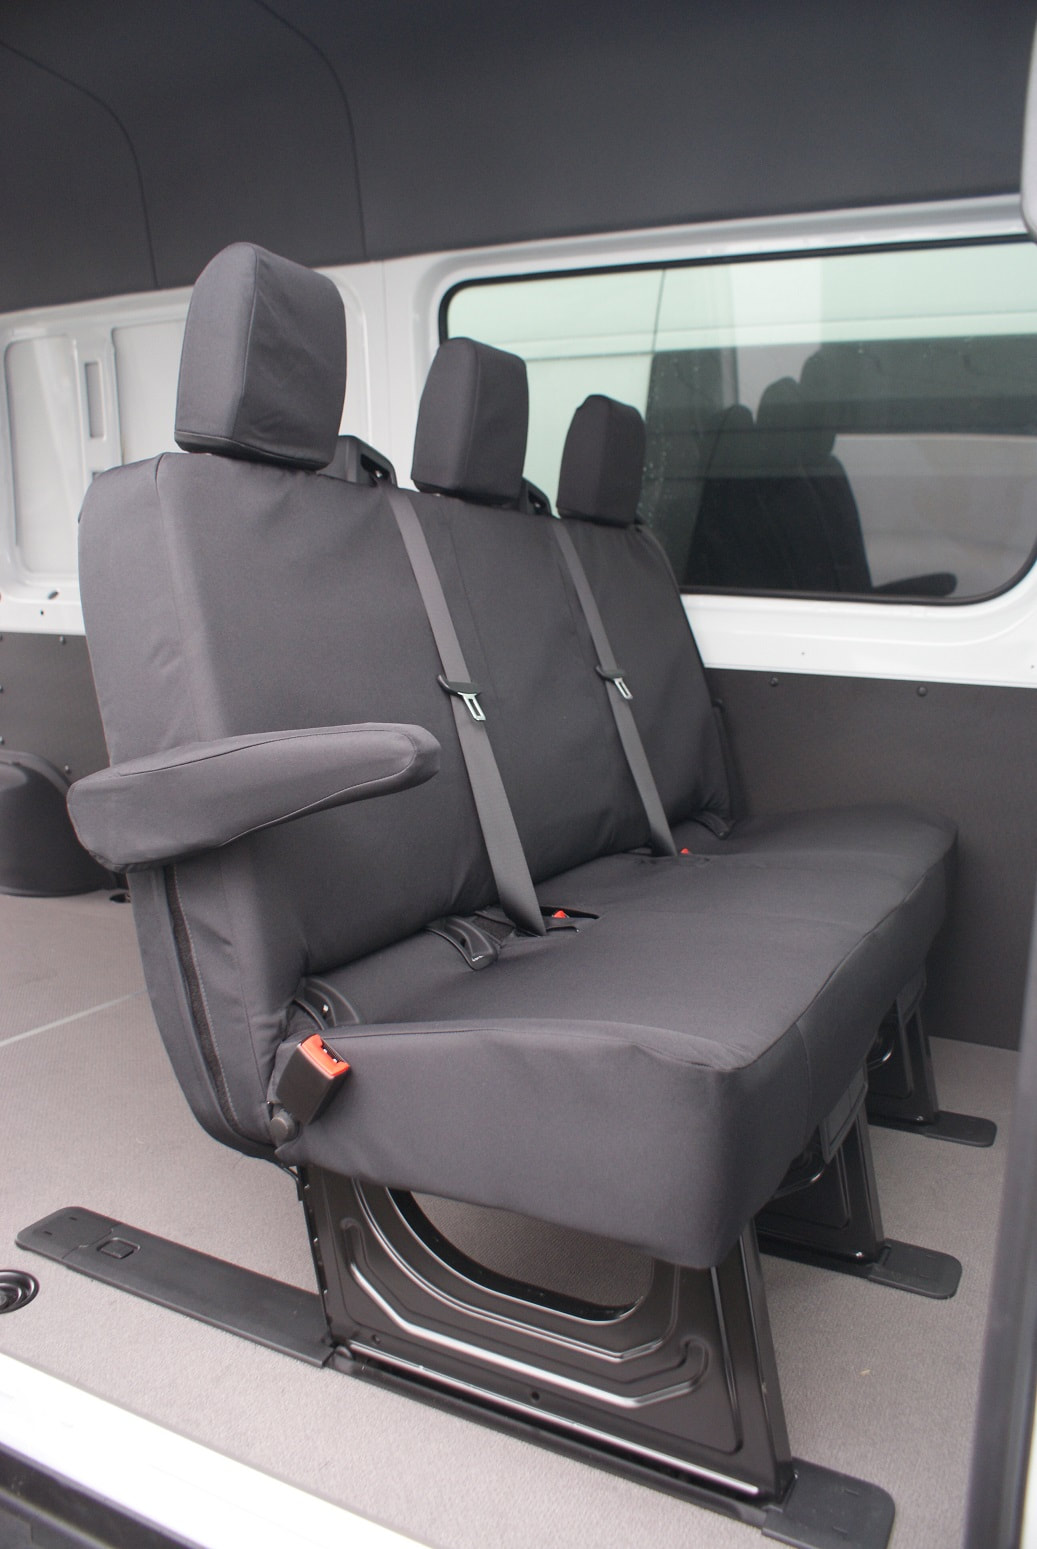 seat covers custom fit for passenger bench 2019 Sprinter